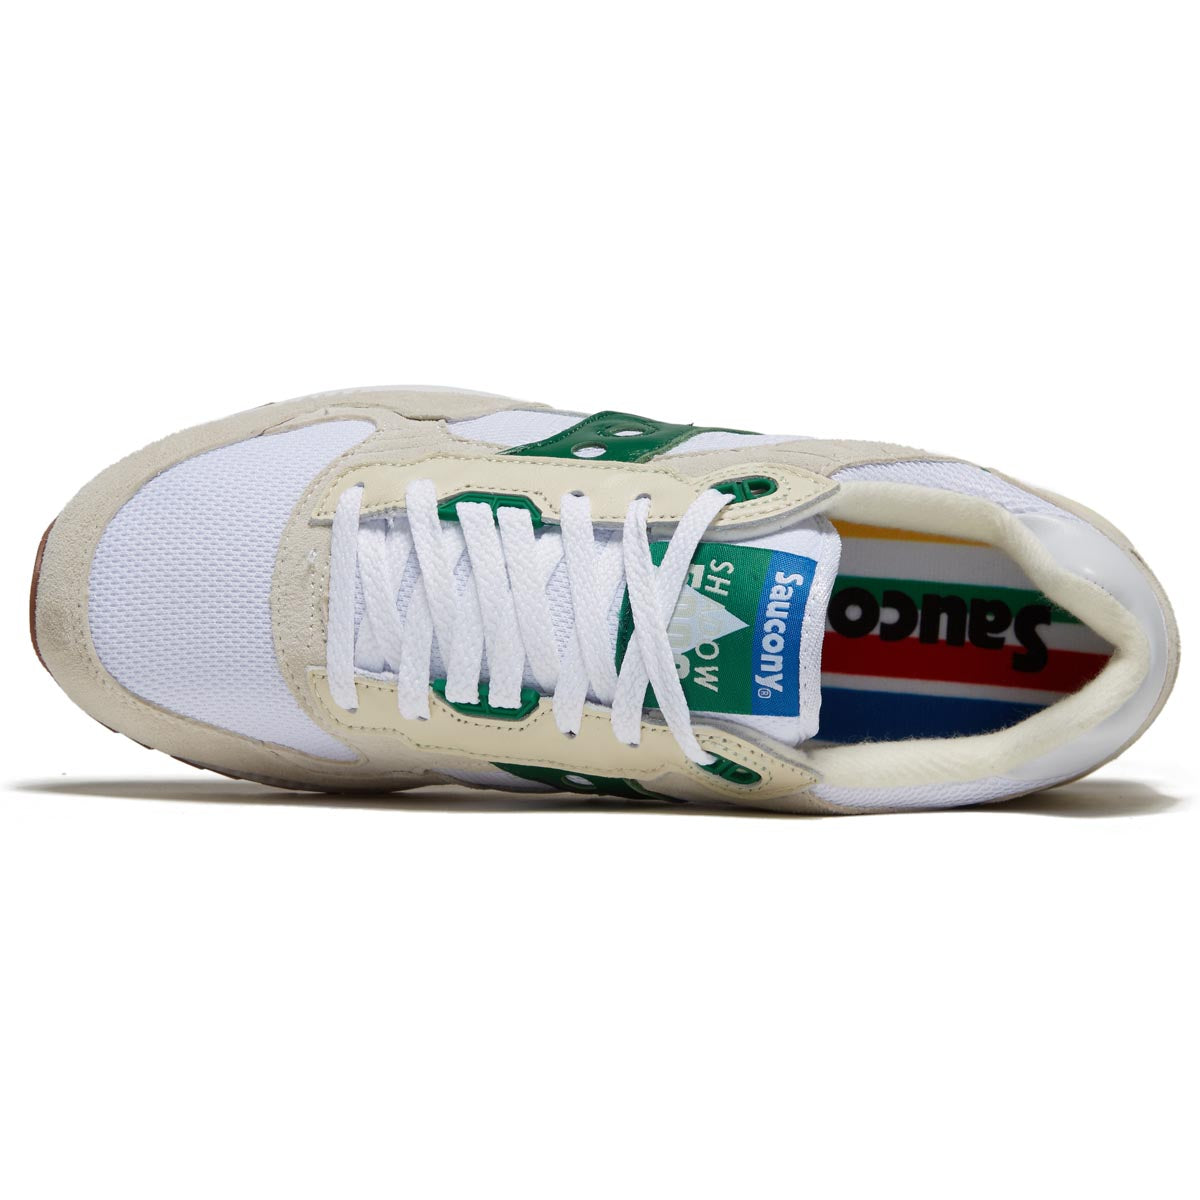 Saucony Shadow 5000 Shoes - White/Green image 3